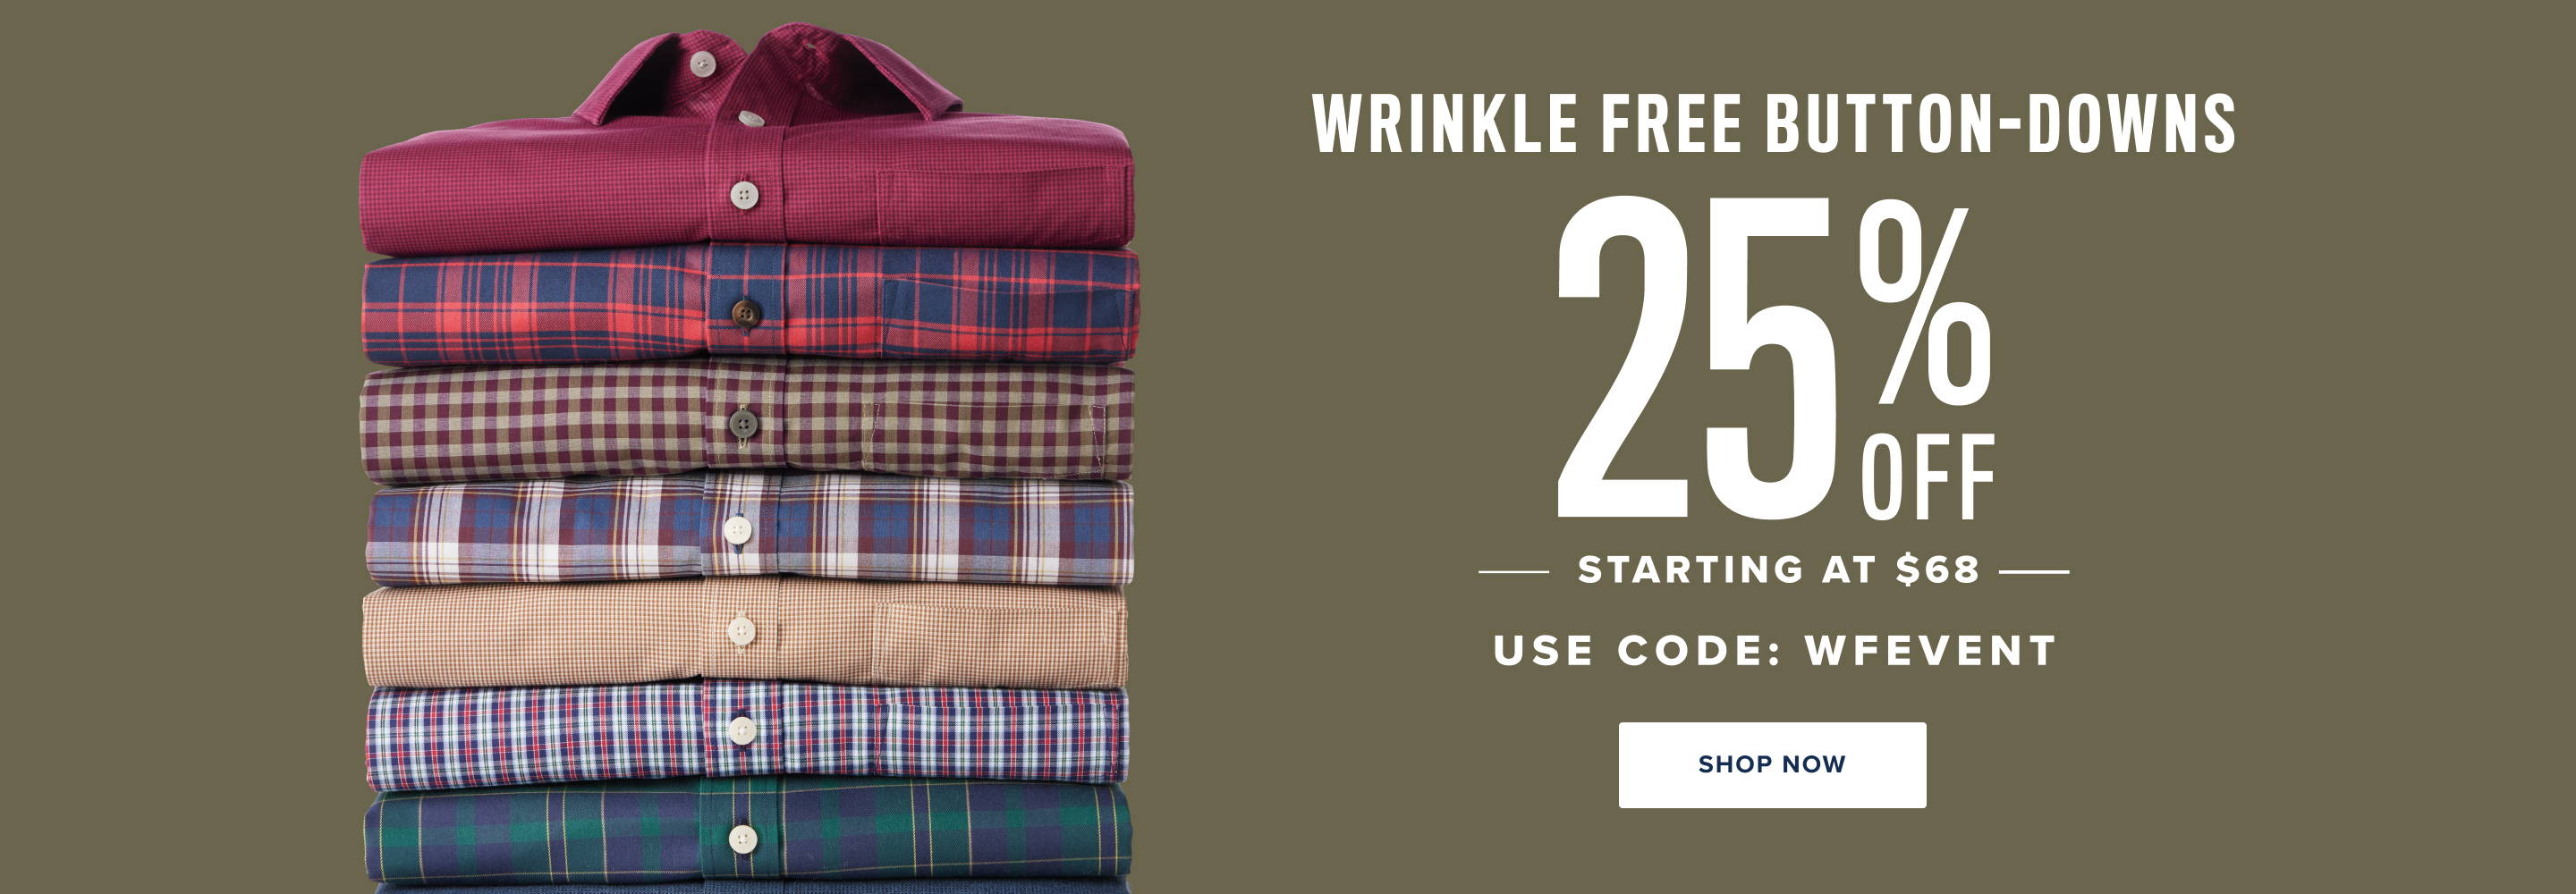 Wrinkle Free Button-Downs 25% Off. Starting at $68. Use cod: WFEVENT